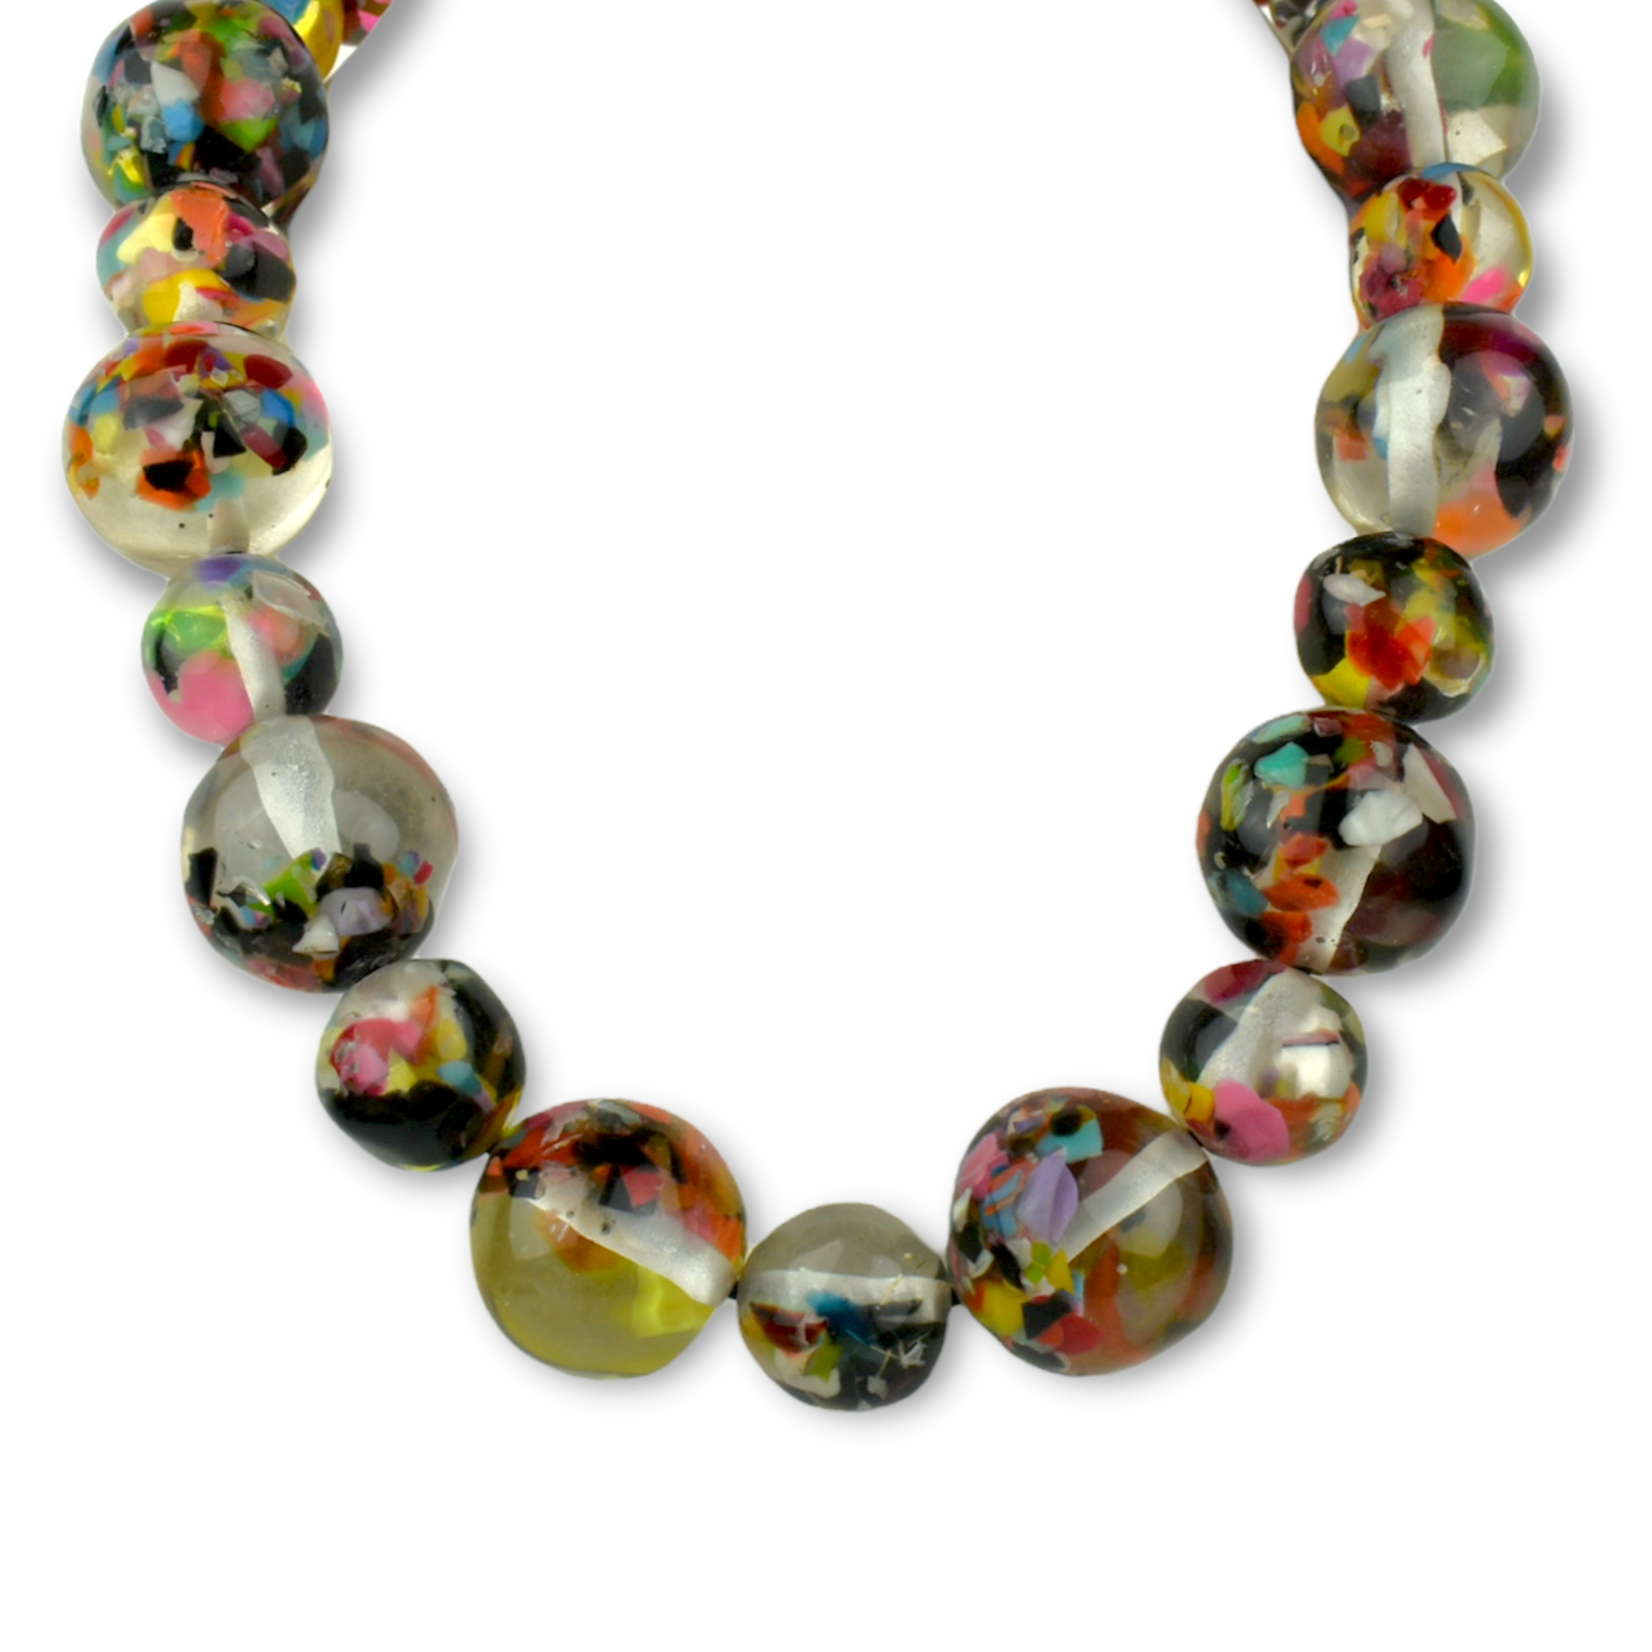 Atelier 1701 Giant Flecked Resin Marble Necklace